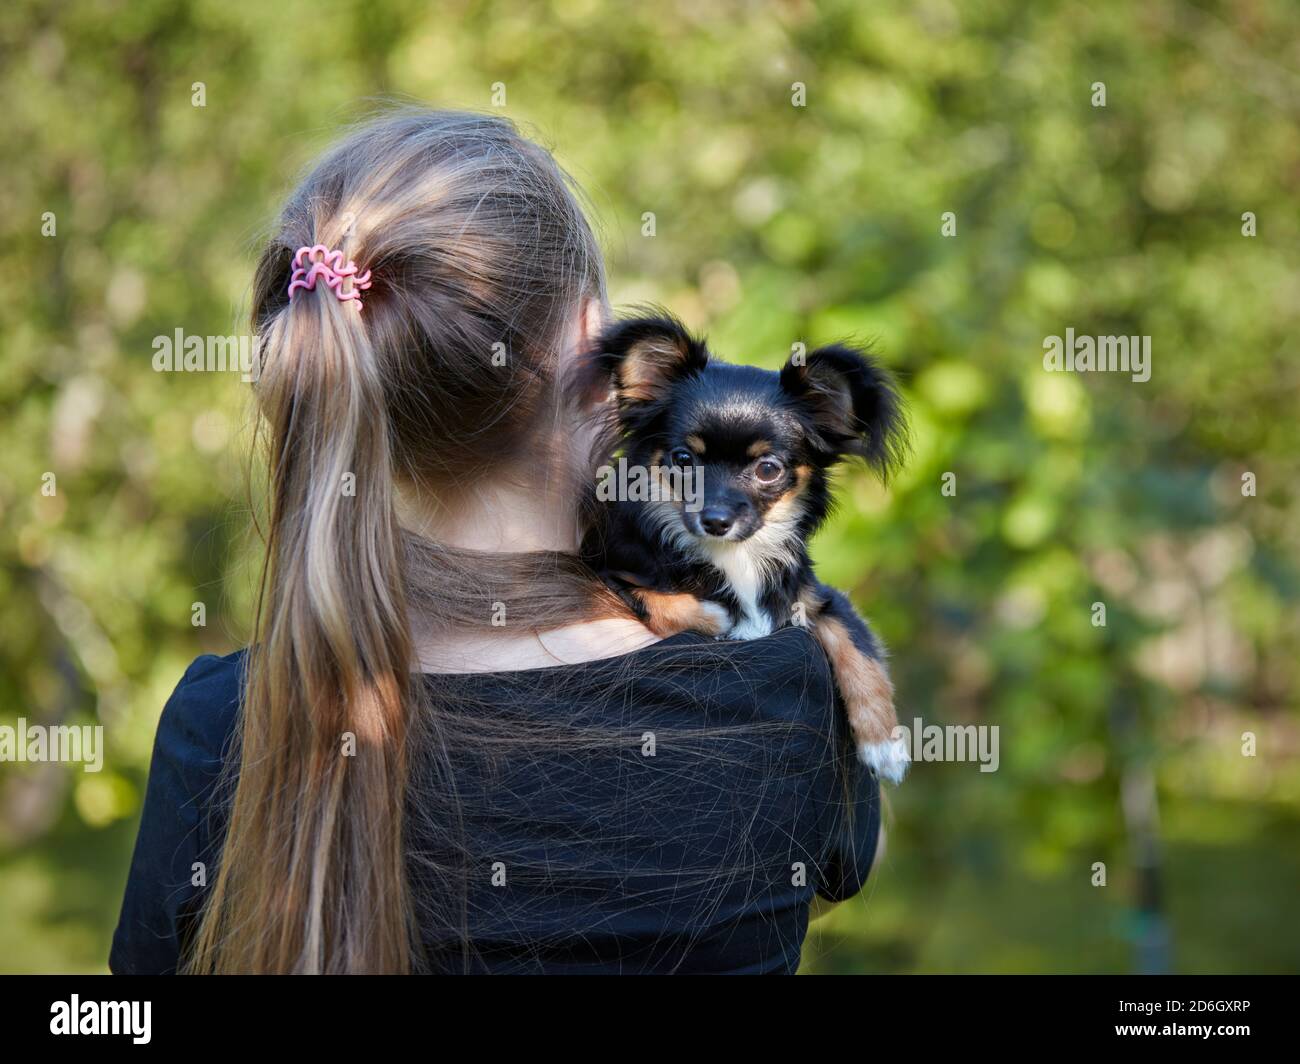 Young blond girl with her black juvenile long-haired Chihuahua dog on her shoulder. Stock Photo